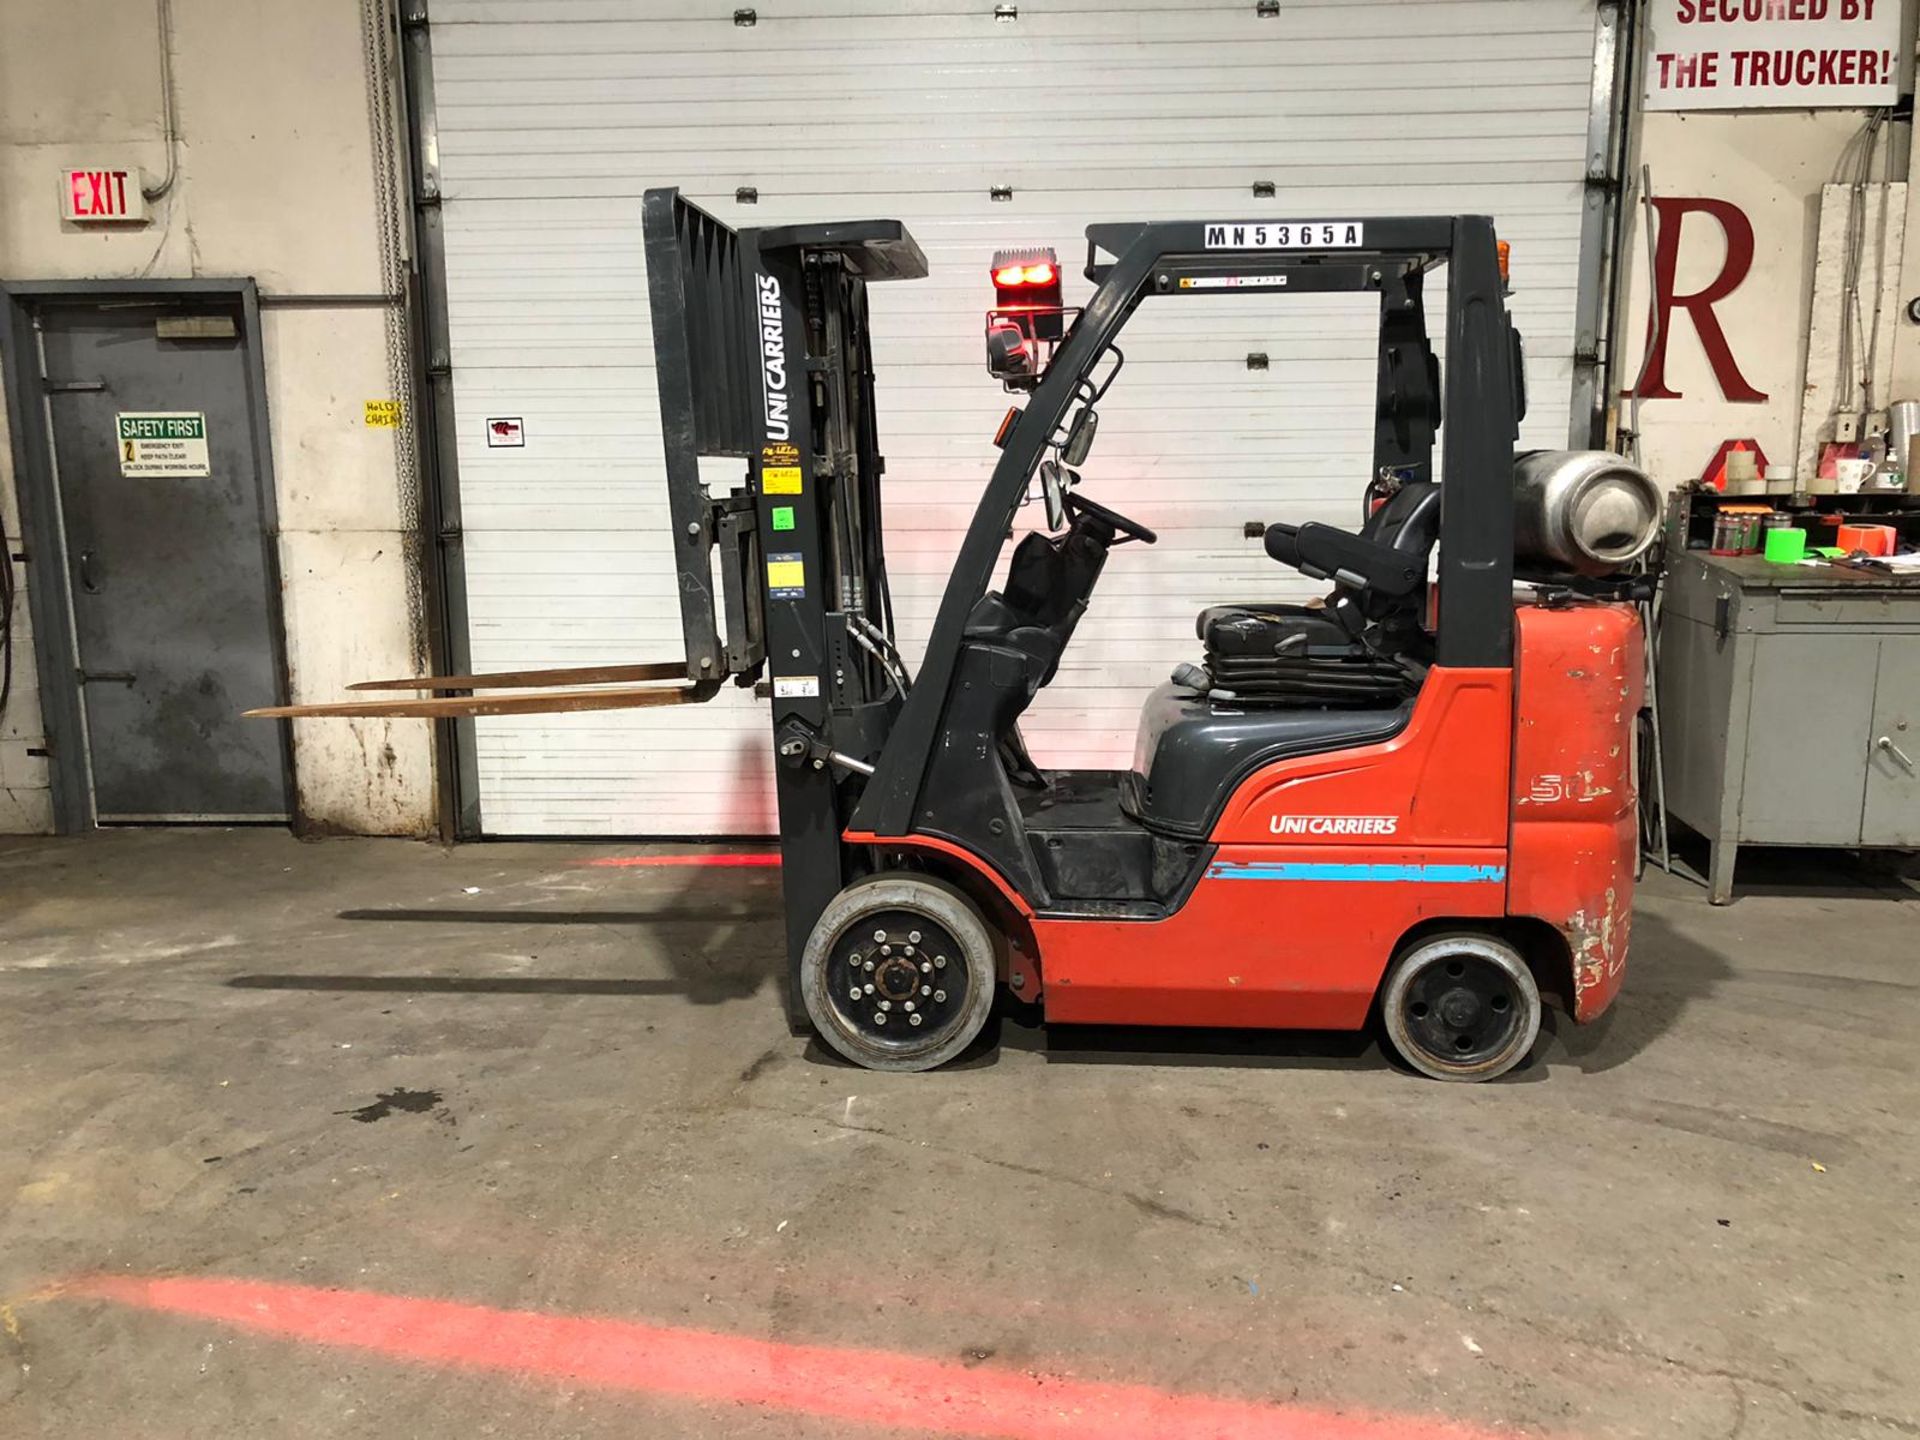 2020 Nissan Unicarrier 5,000lbs Capacity Forklift LPG (propane) WITH VERY LOW HOURS & Sideshift &